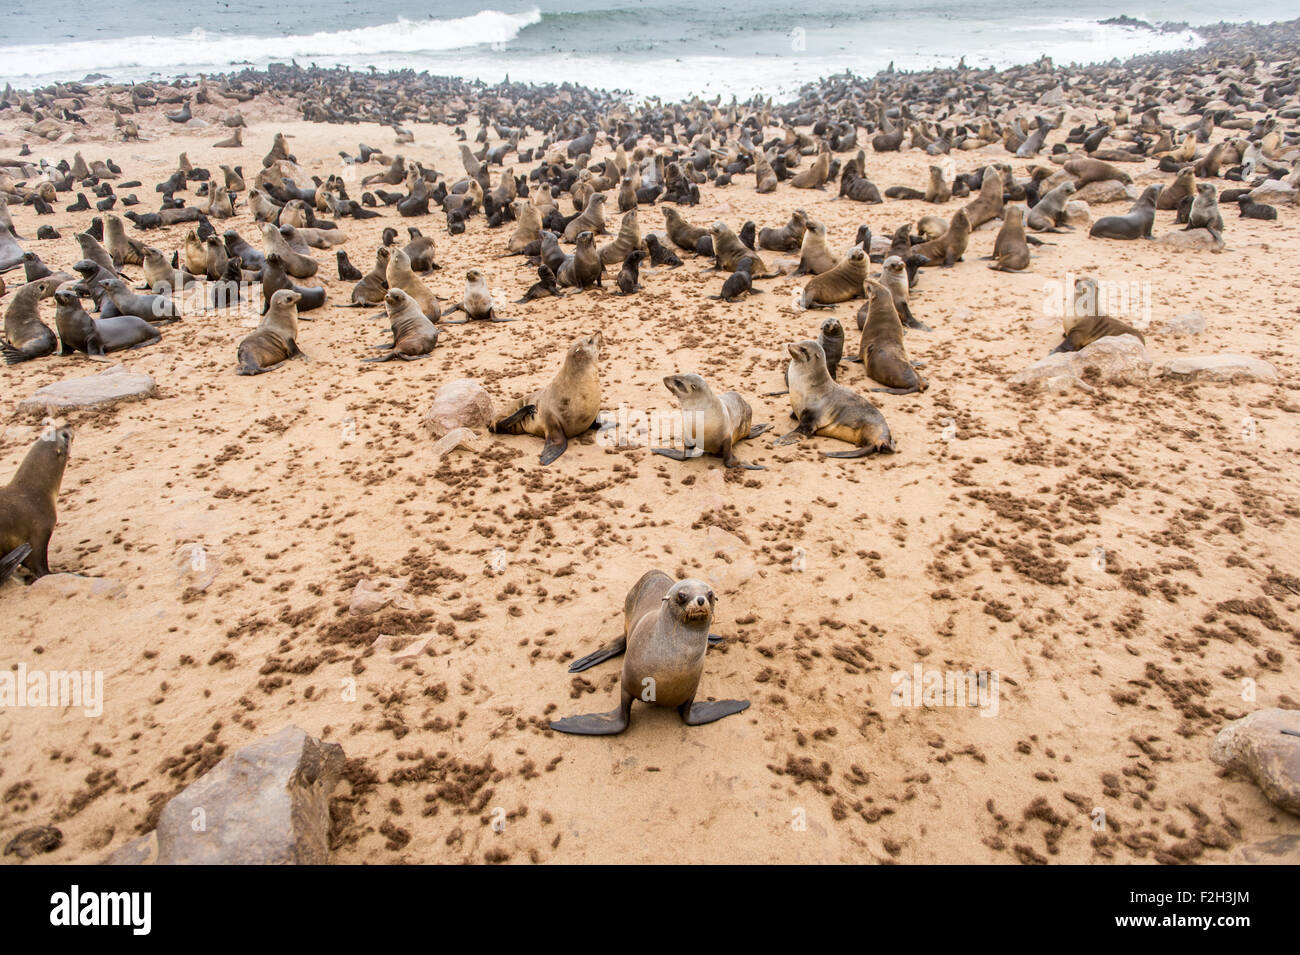 Cape Fur Seals (pinnipedia) on the Seal reserve of the Skeleton Coast in Africa Stock Photo